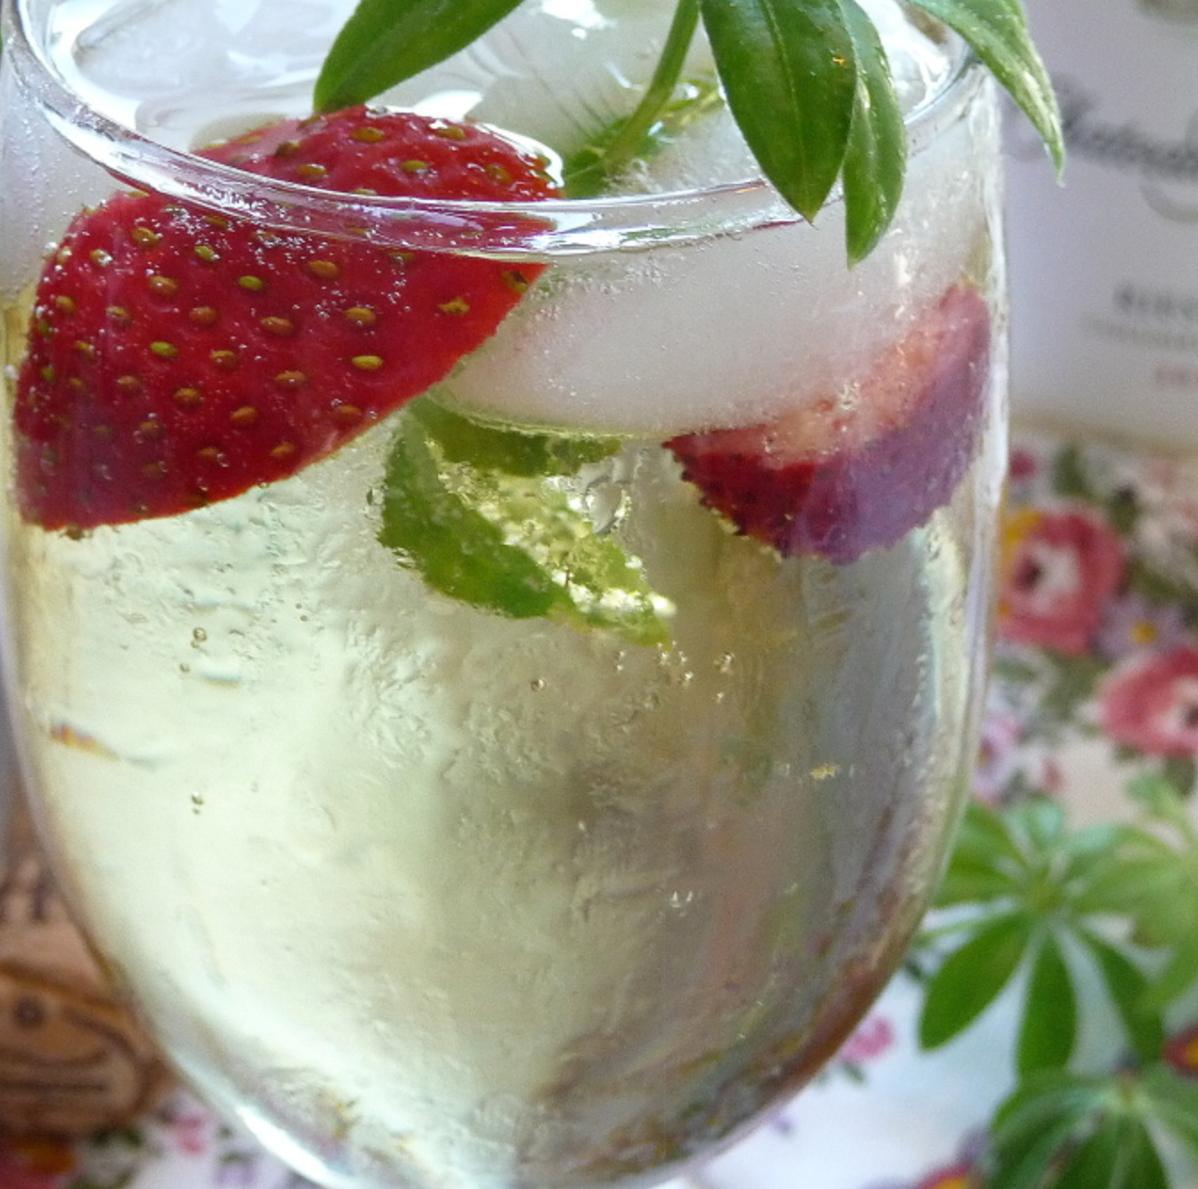  Impress your guests with this beautiful and easy-to-make May Wine Punch.